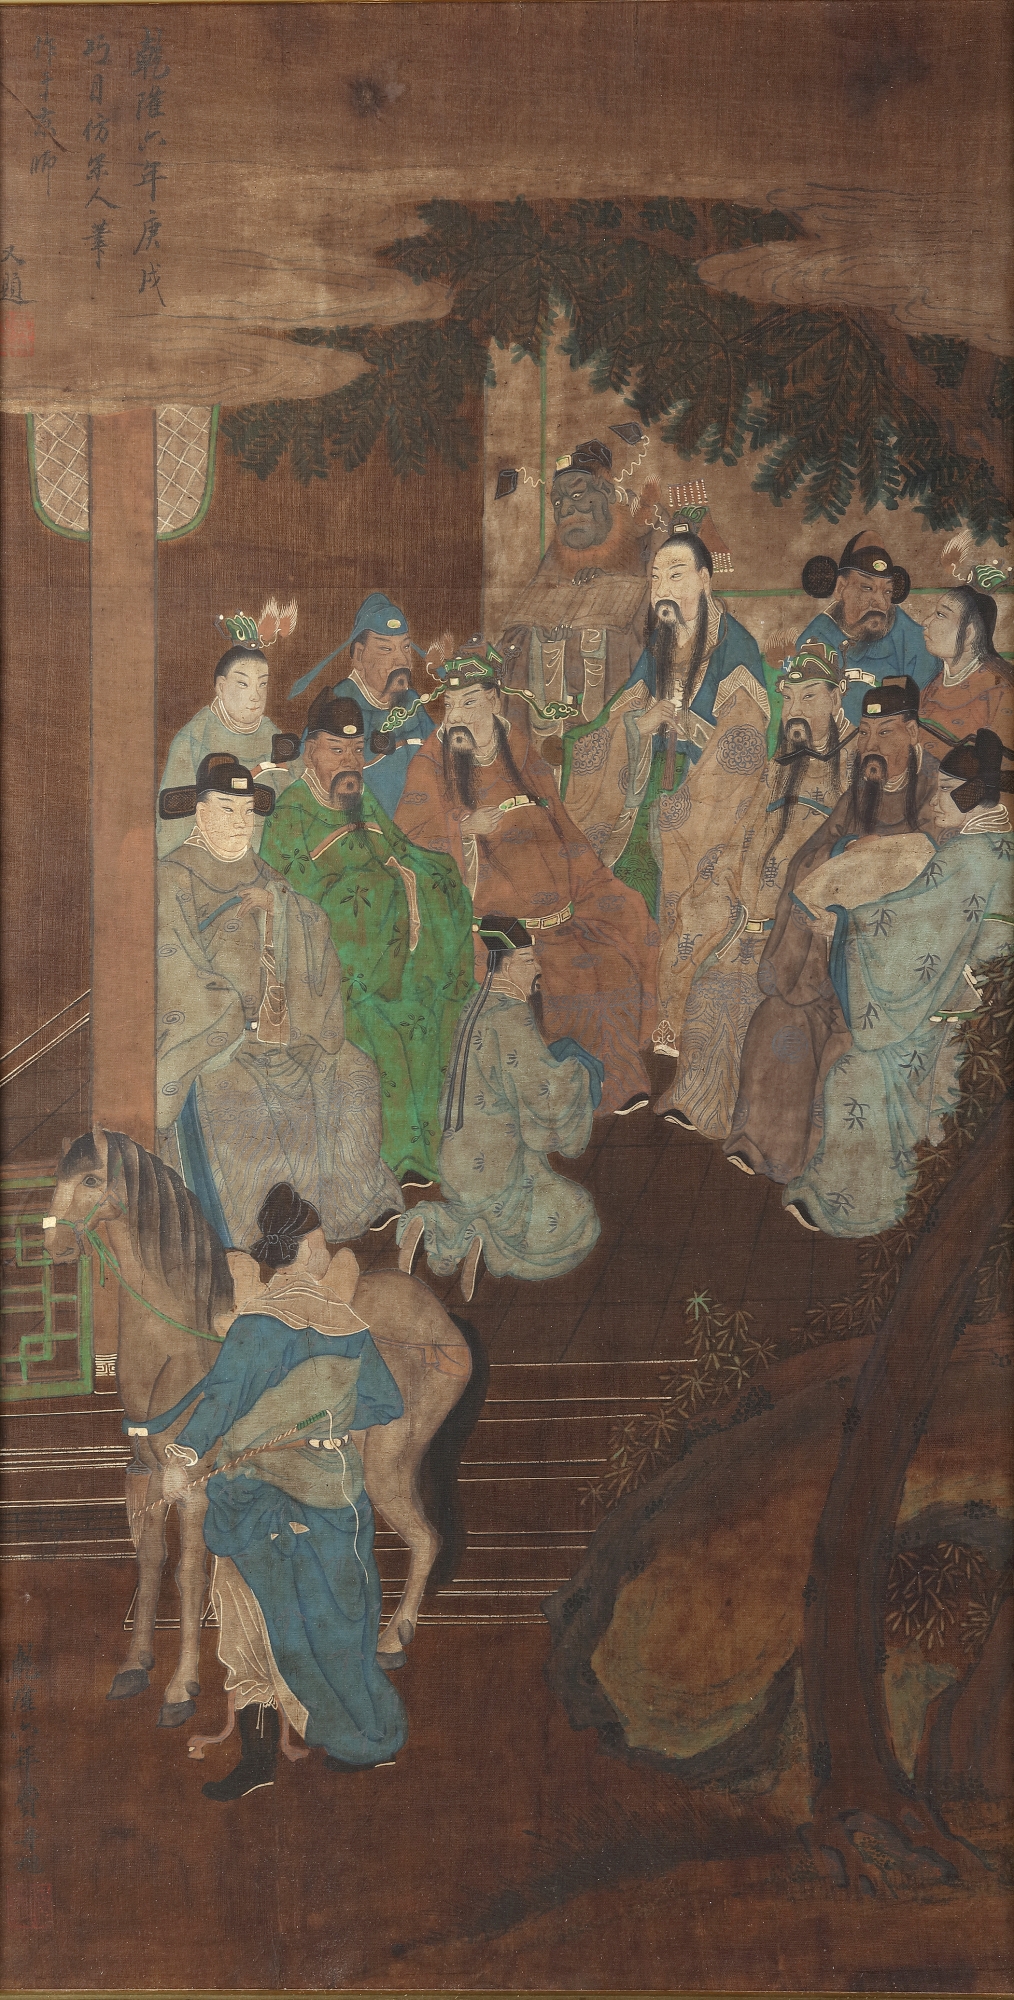 A Chinese painting of Immortals